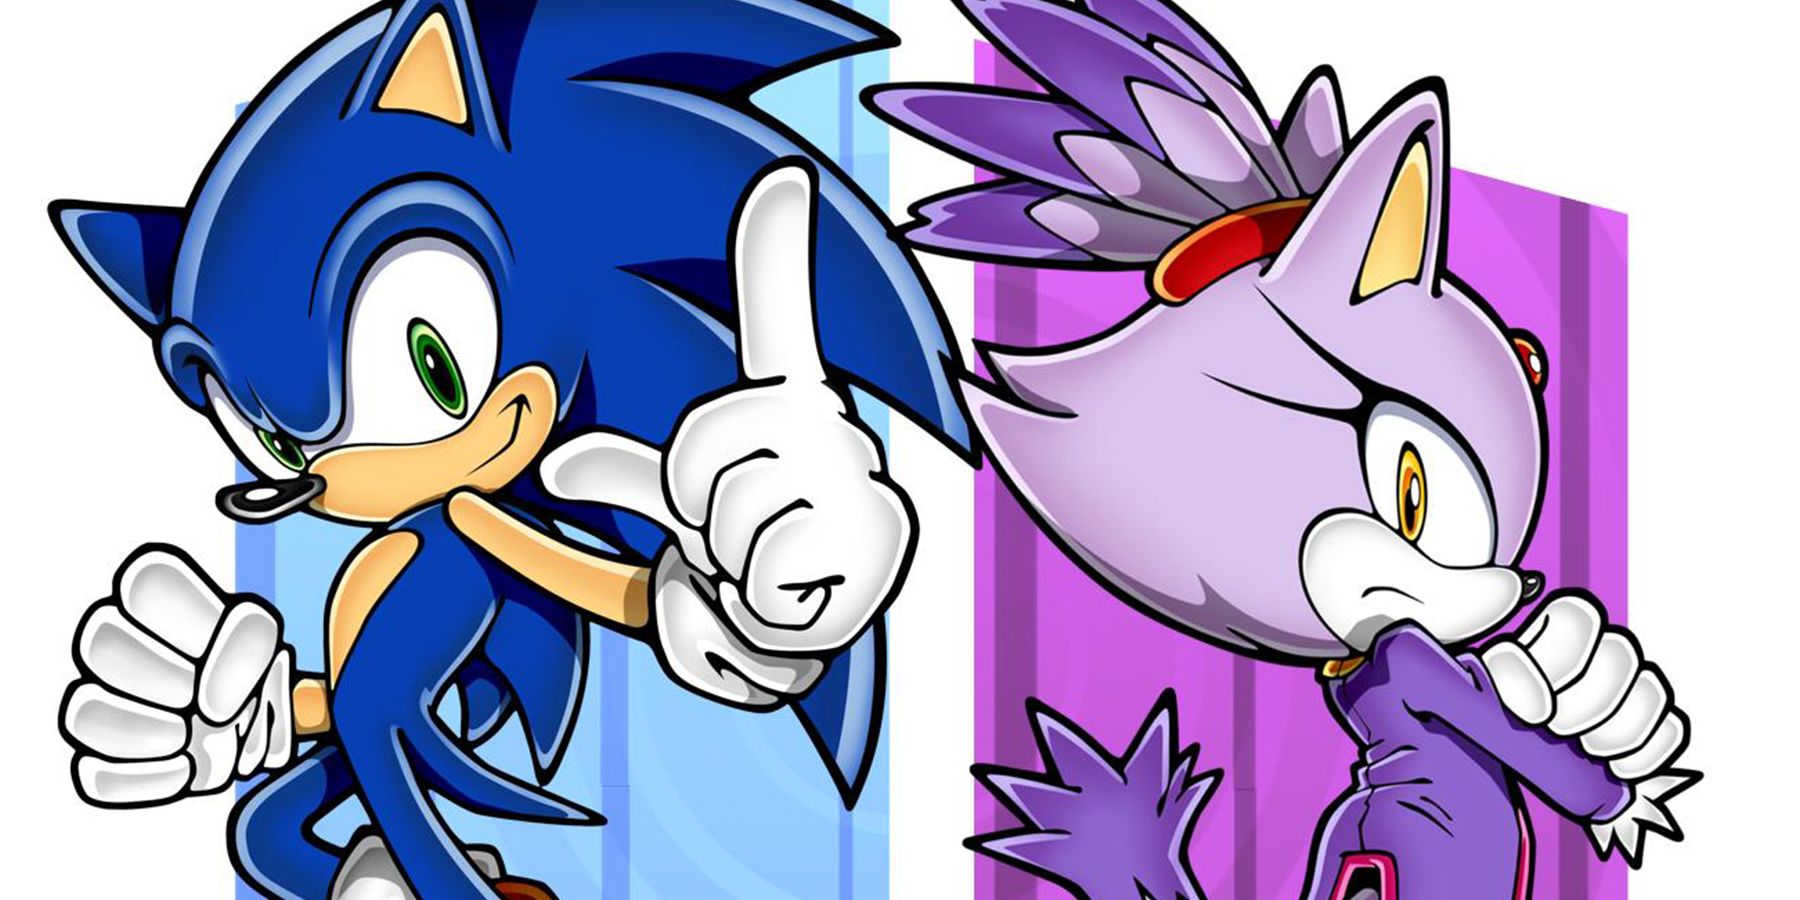 Sonic the Hedgehog and Blaze the Cat.